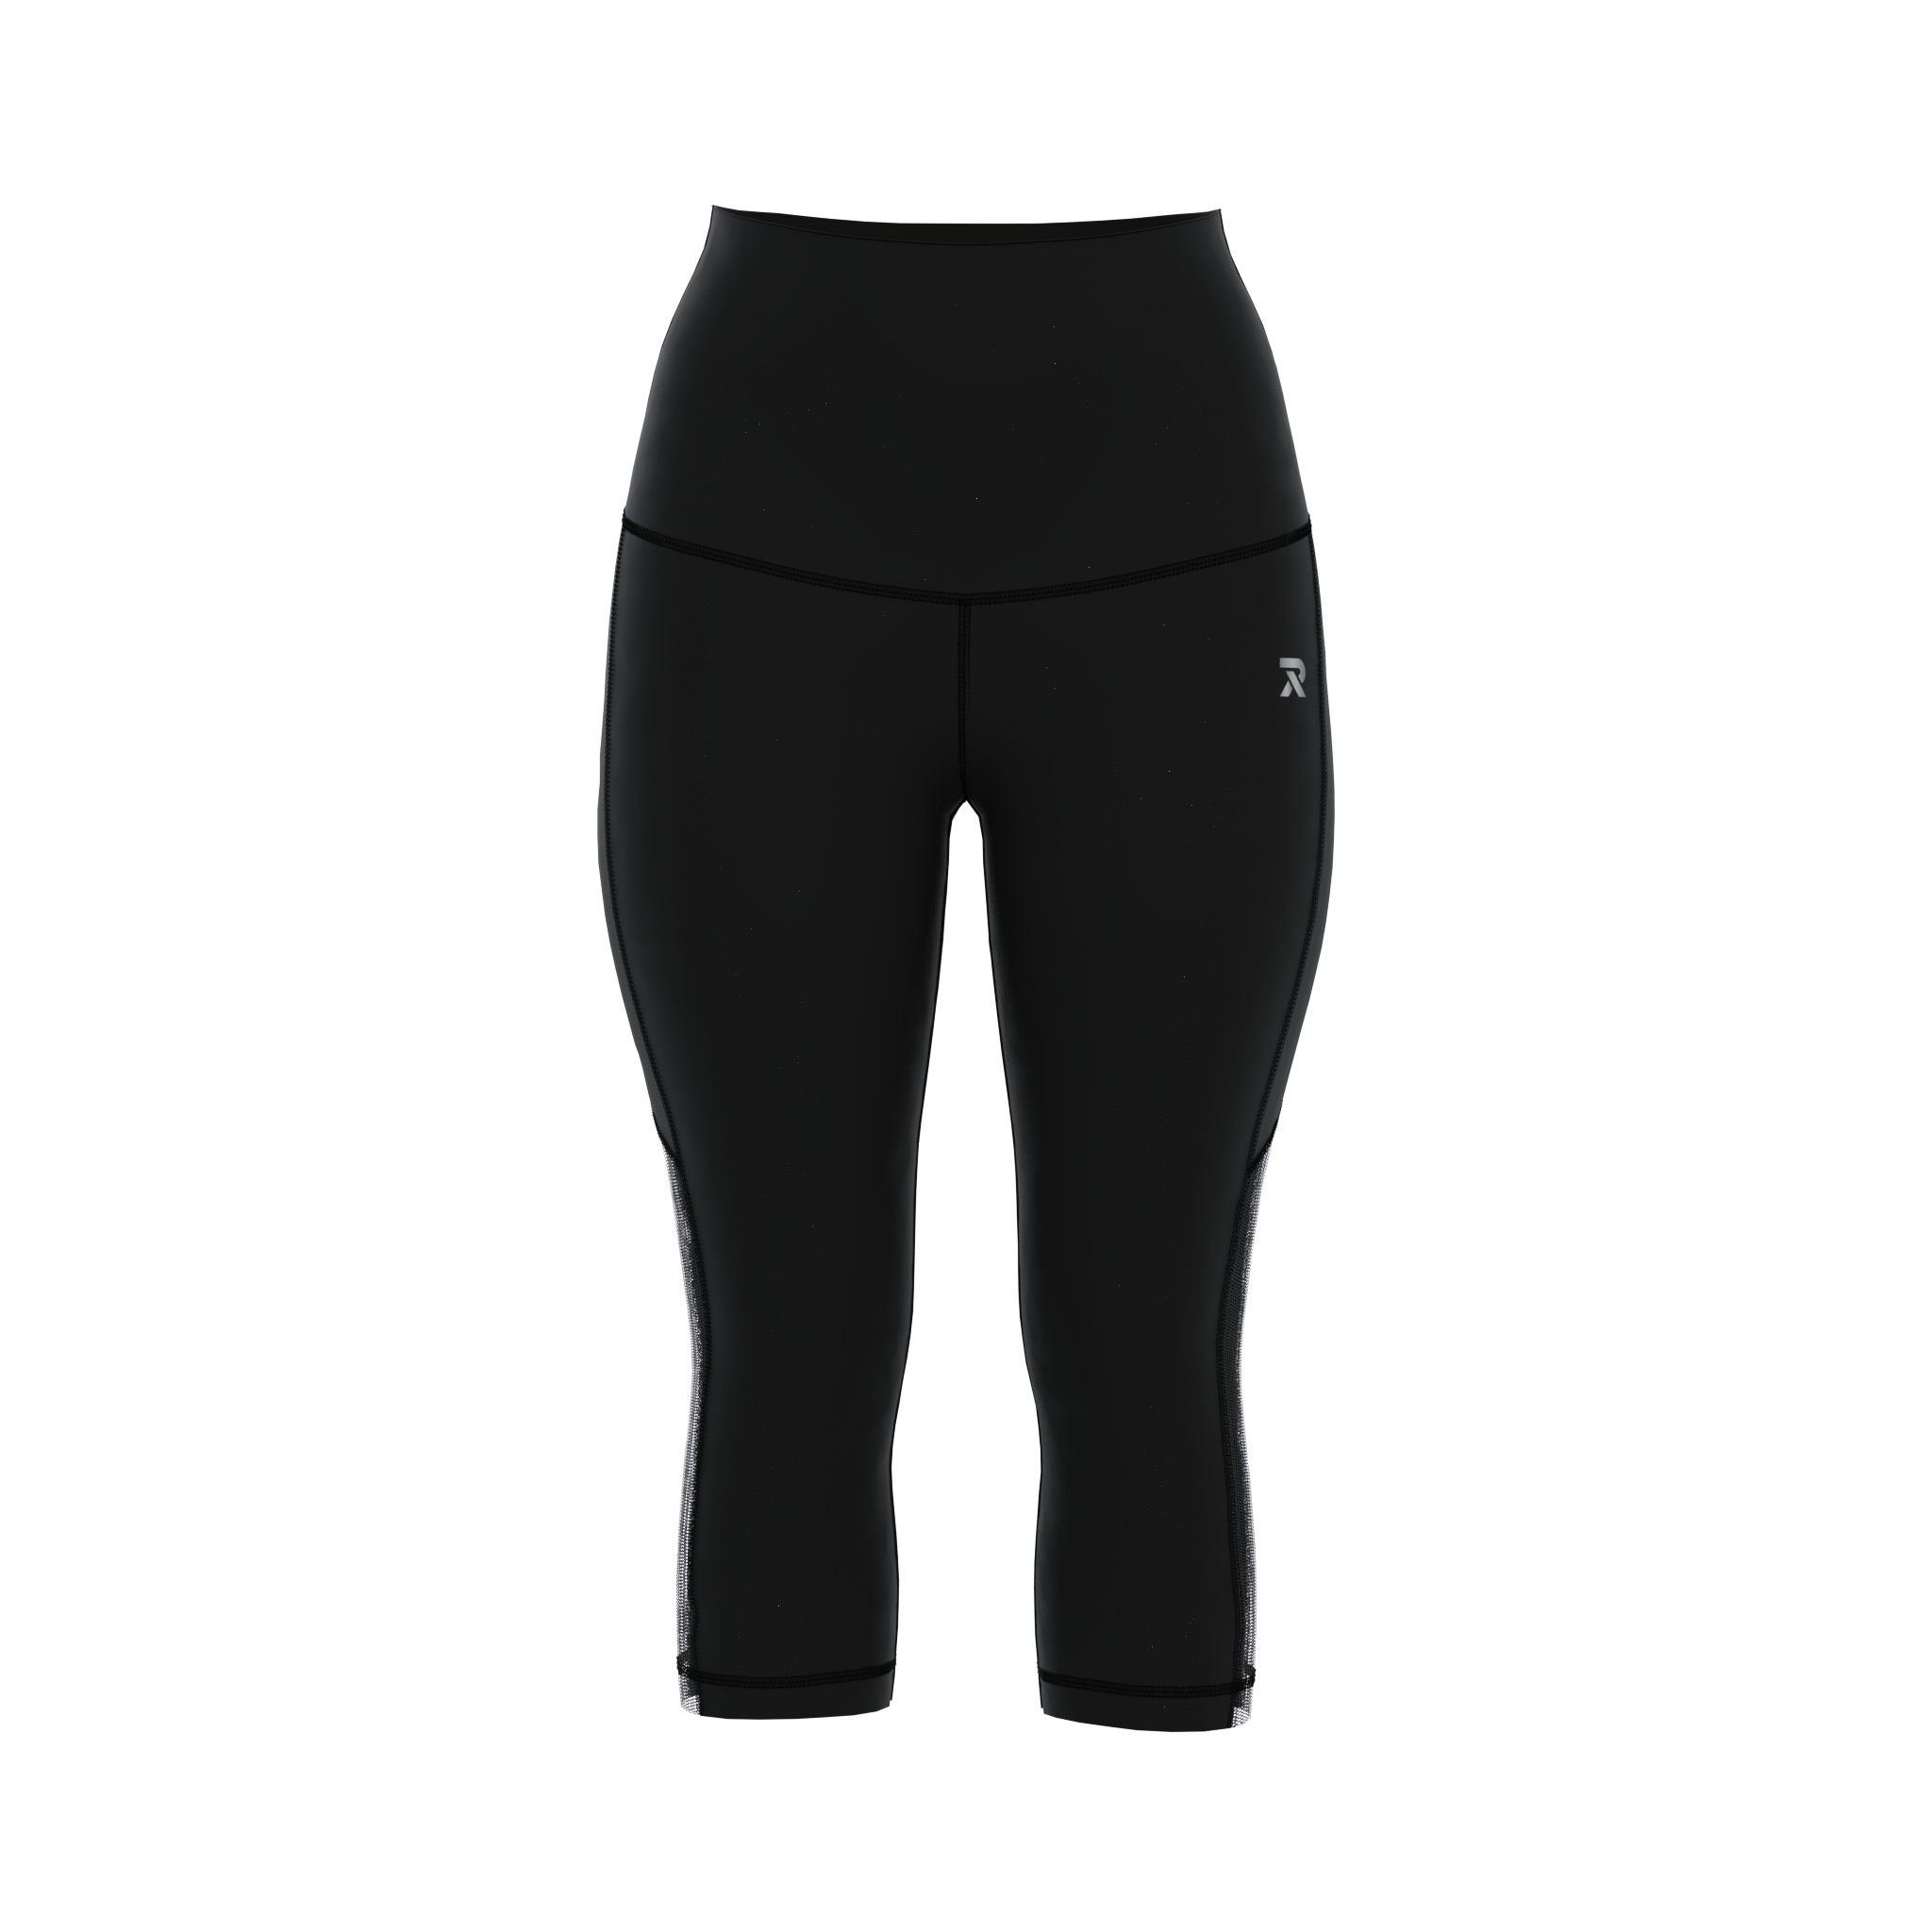 https://cdn.webshopapp.com/shops/278265/files/418795106/womens-3-4-shaping-tight-dry-cool-sustainable.jpg